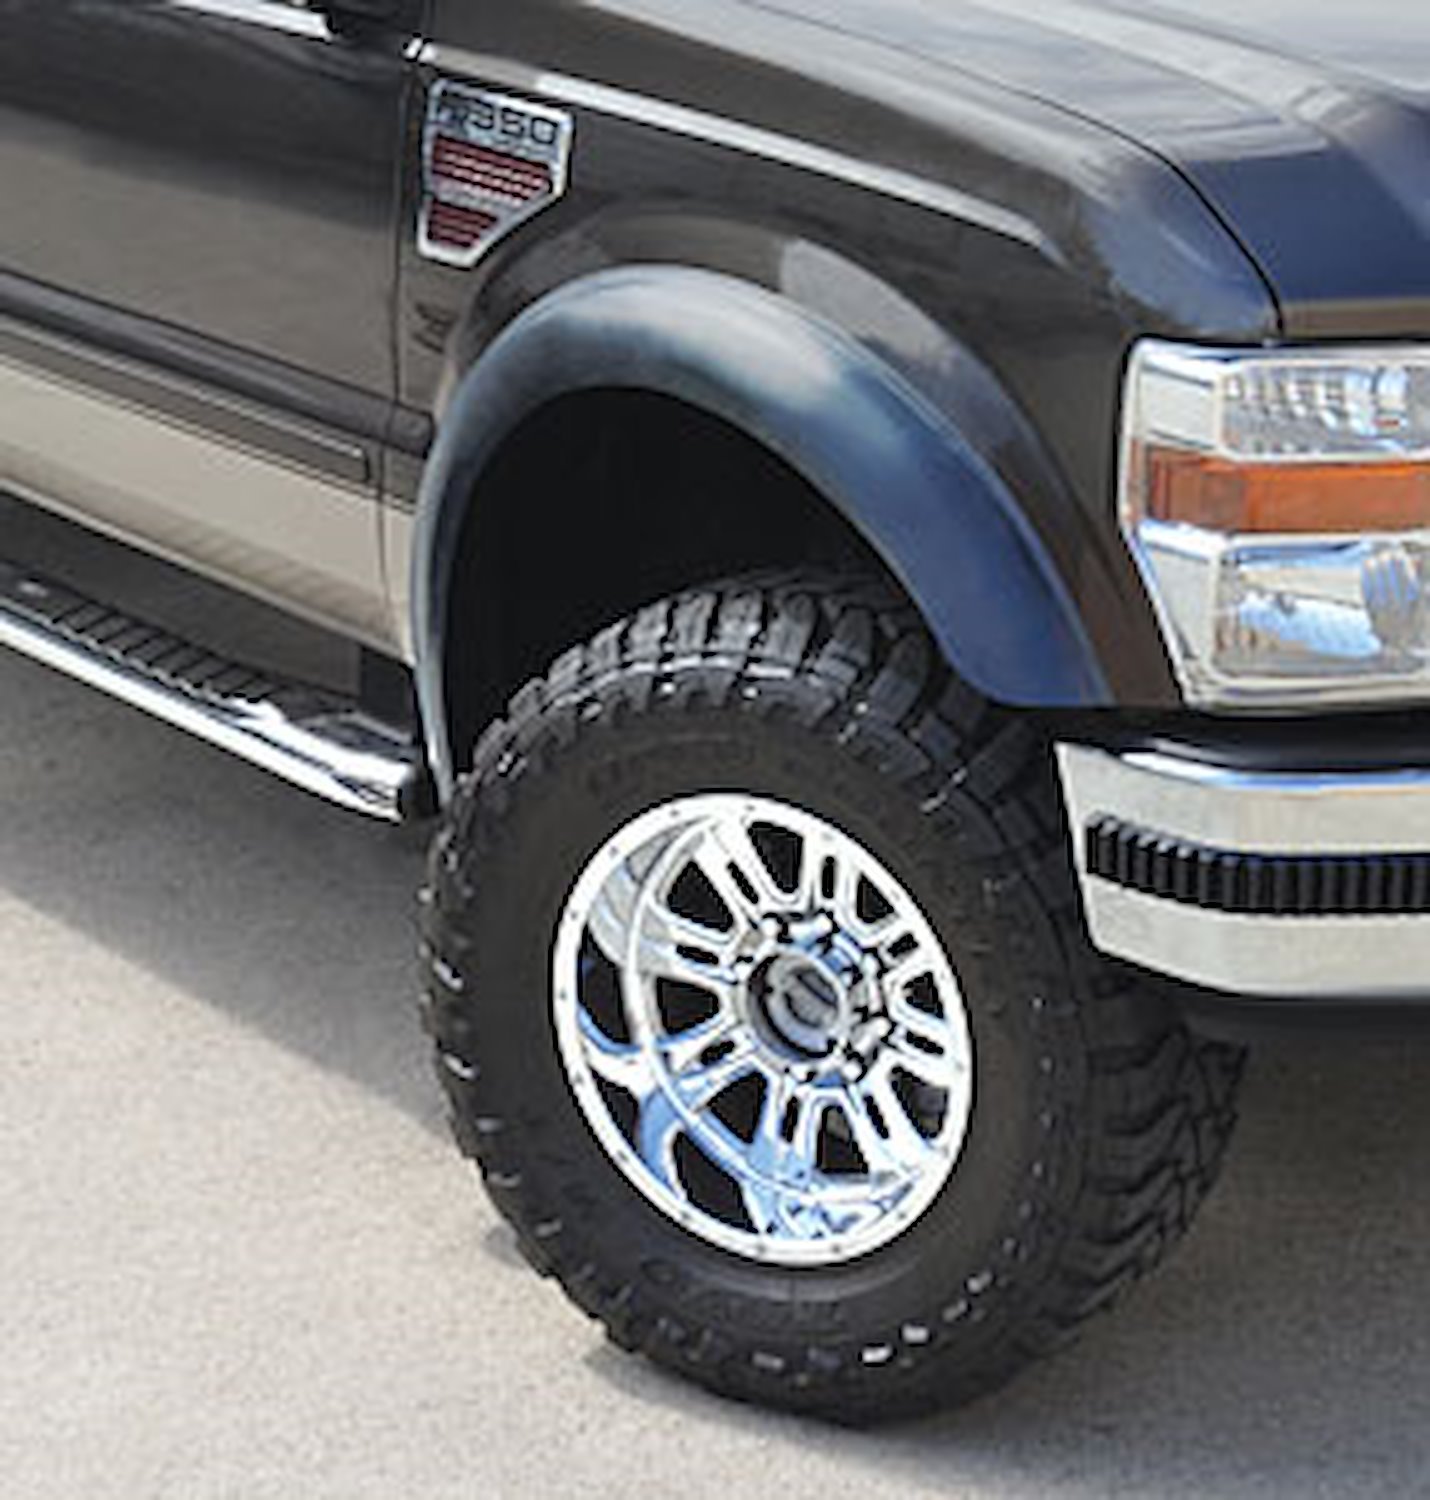 Full Coverage Flexy Flares 3-1/4" x 72" Lengths